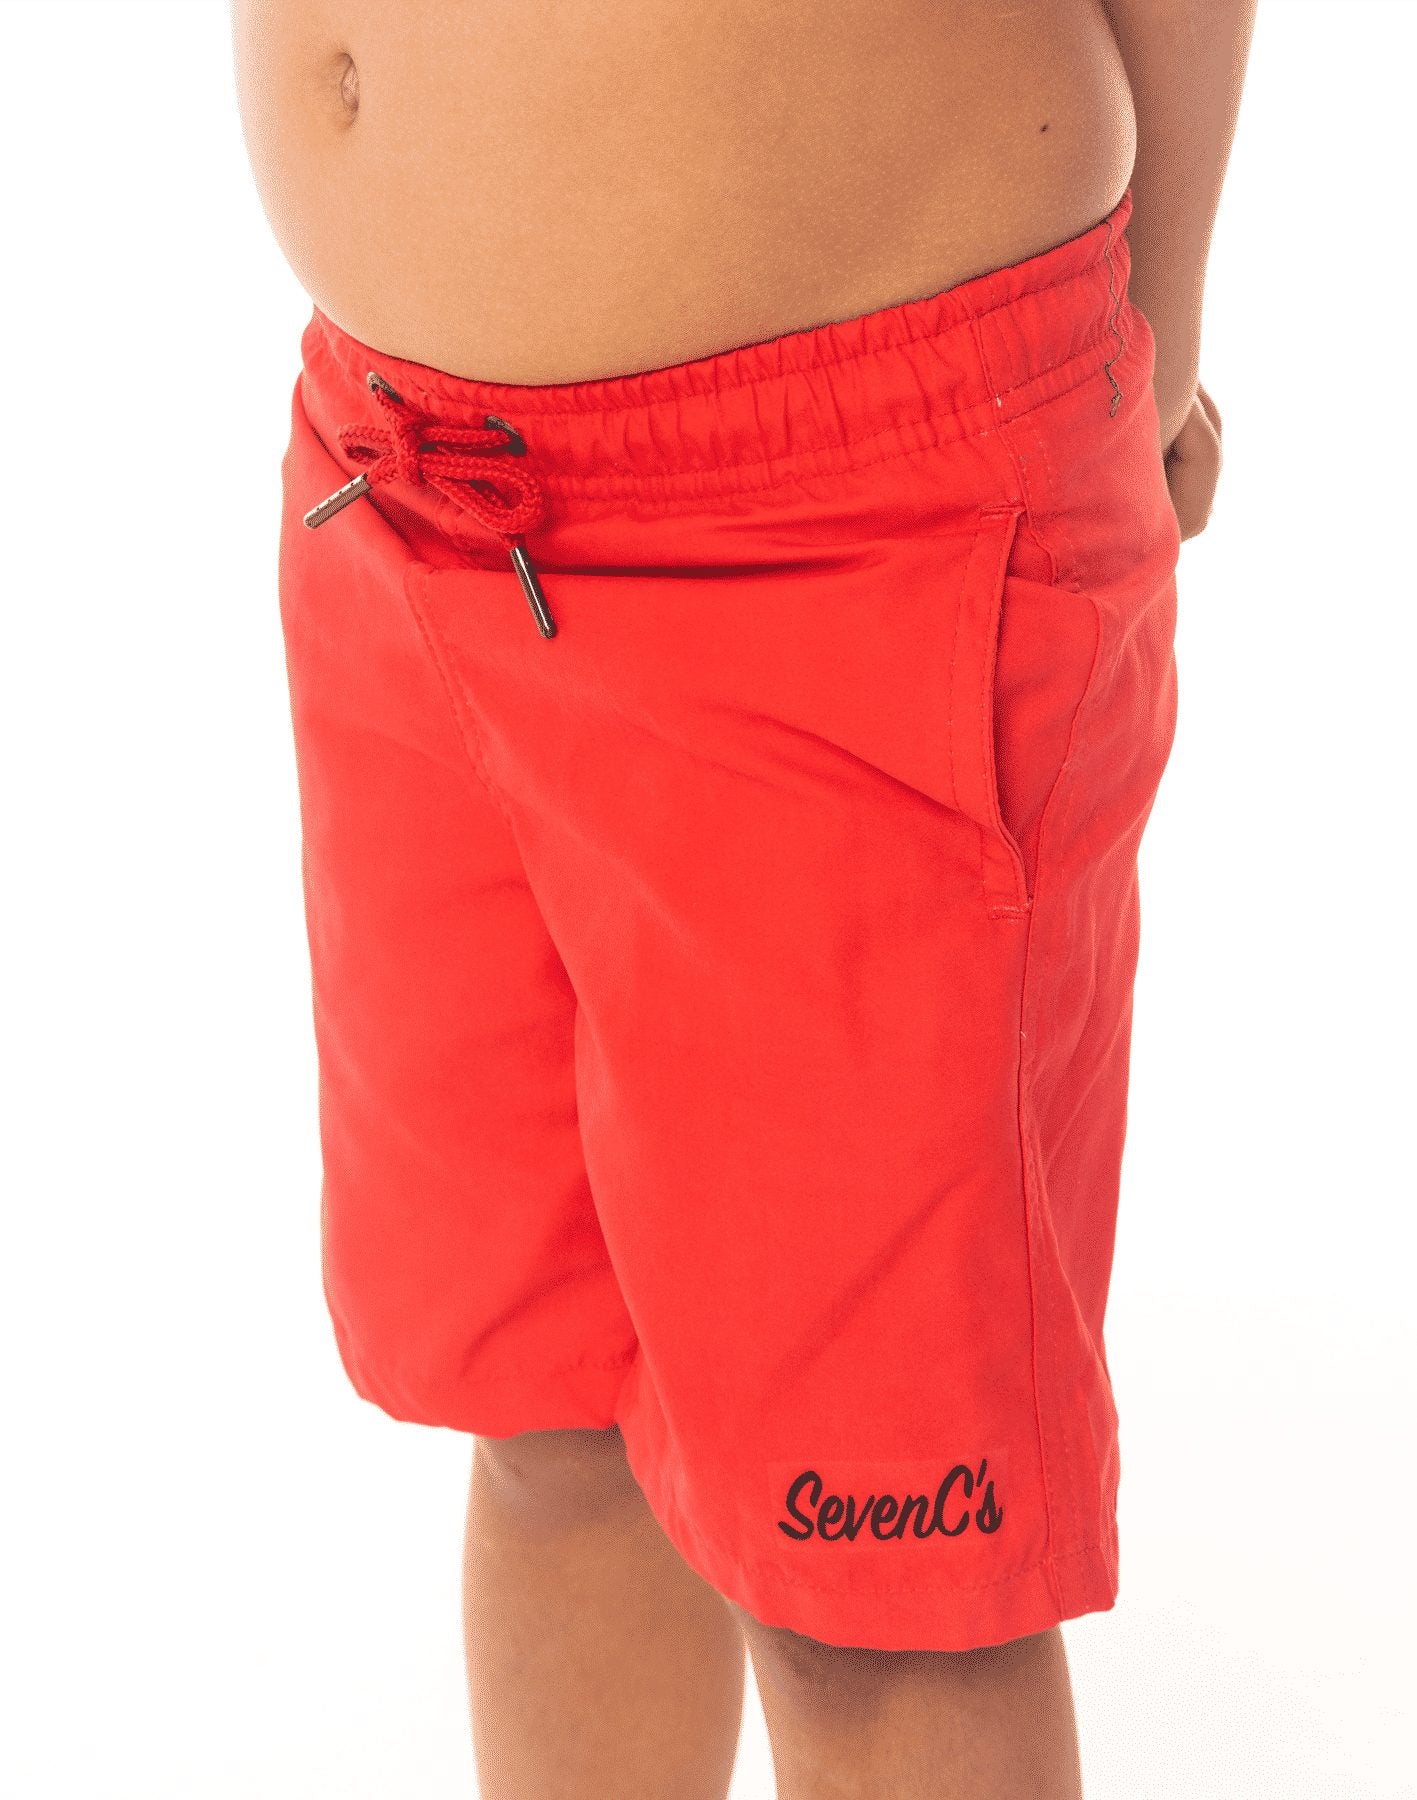 Sustainable Kids' Red Shorts from SevenC's - Side View